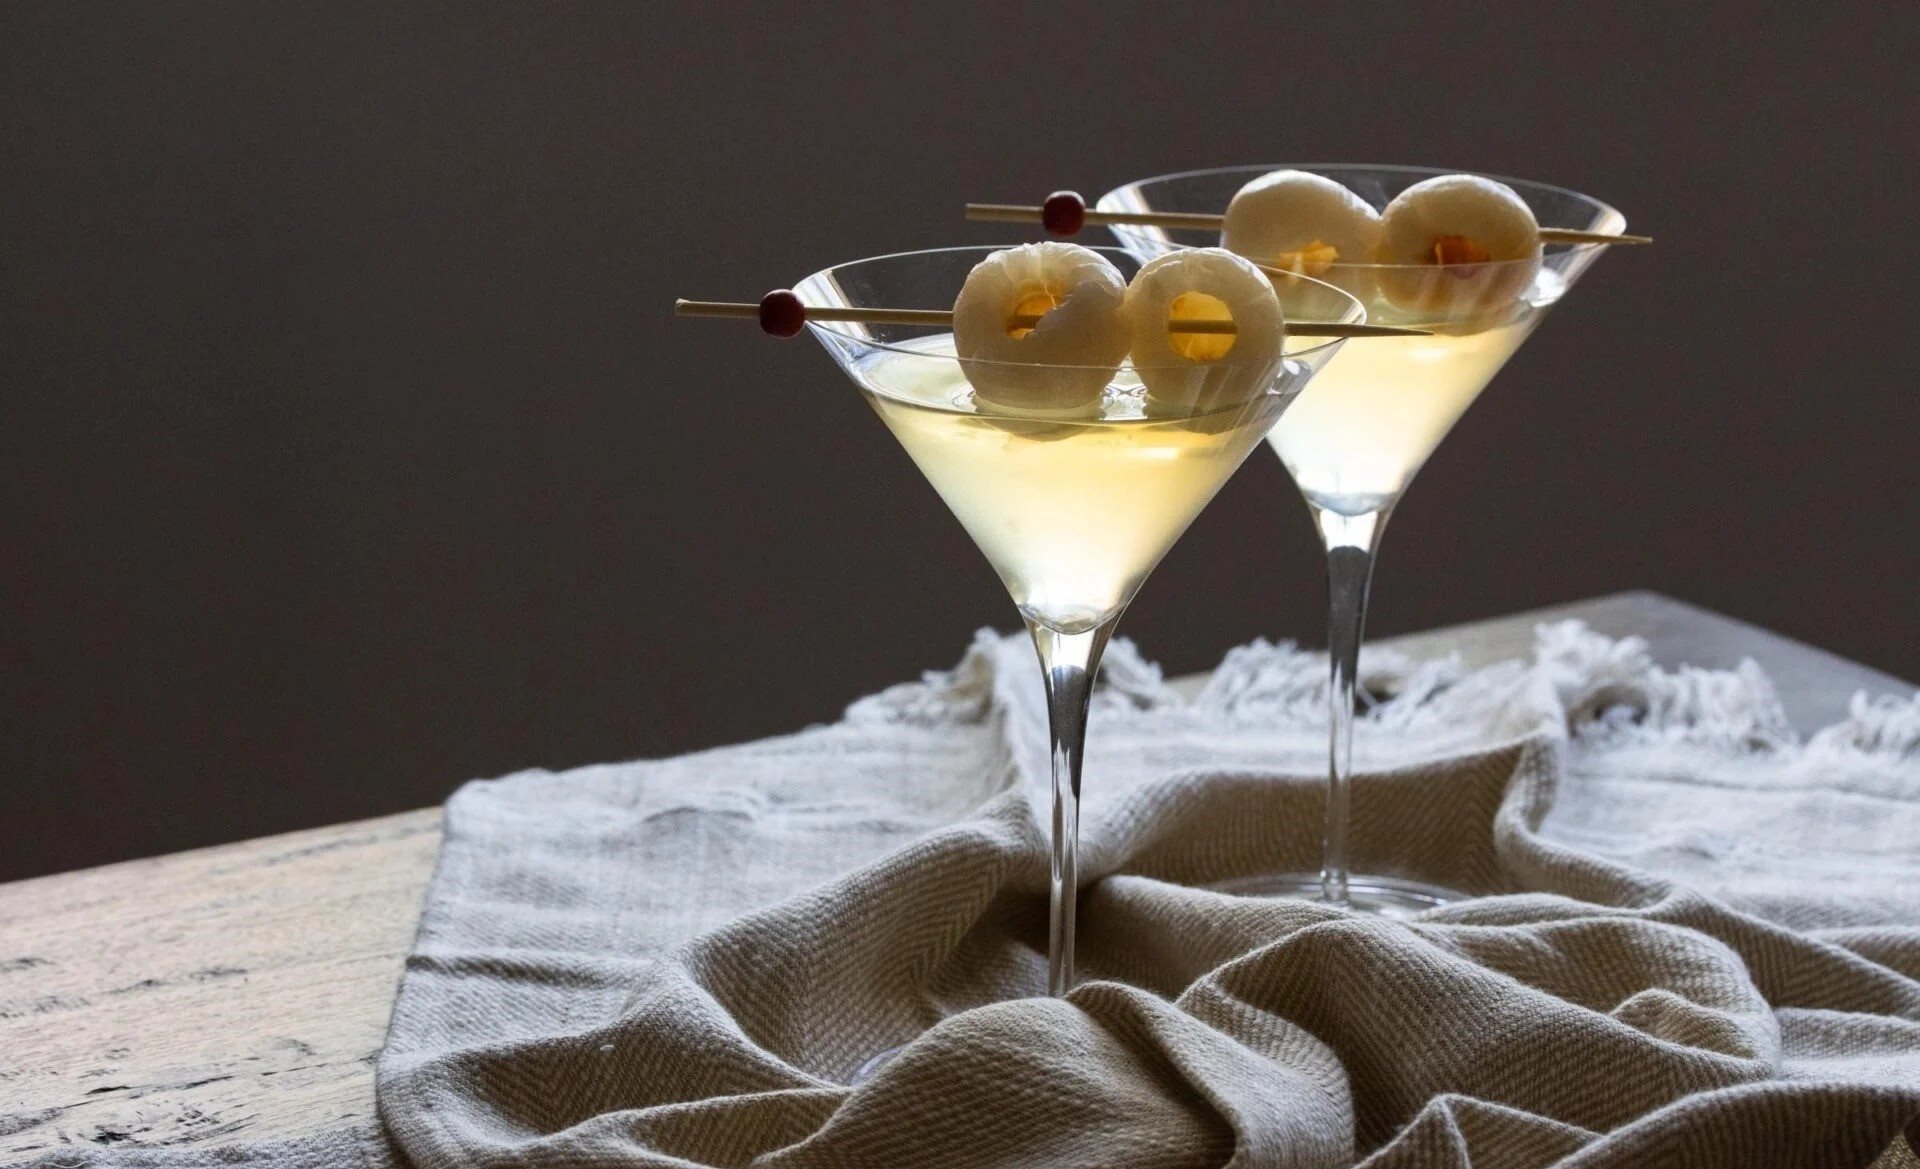 13 Mind-blowing Facts About Lychee Martini - Facts.net